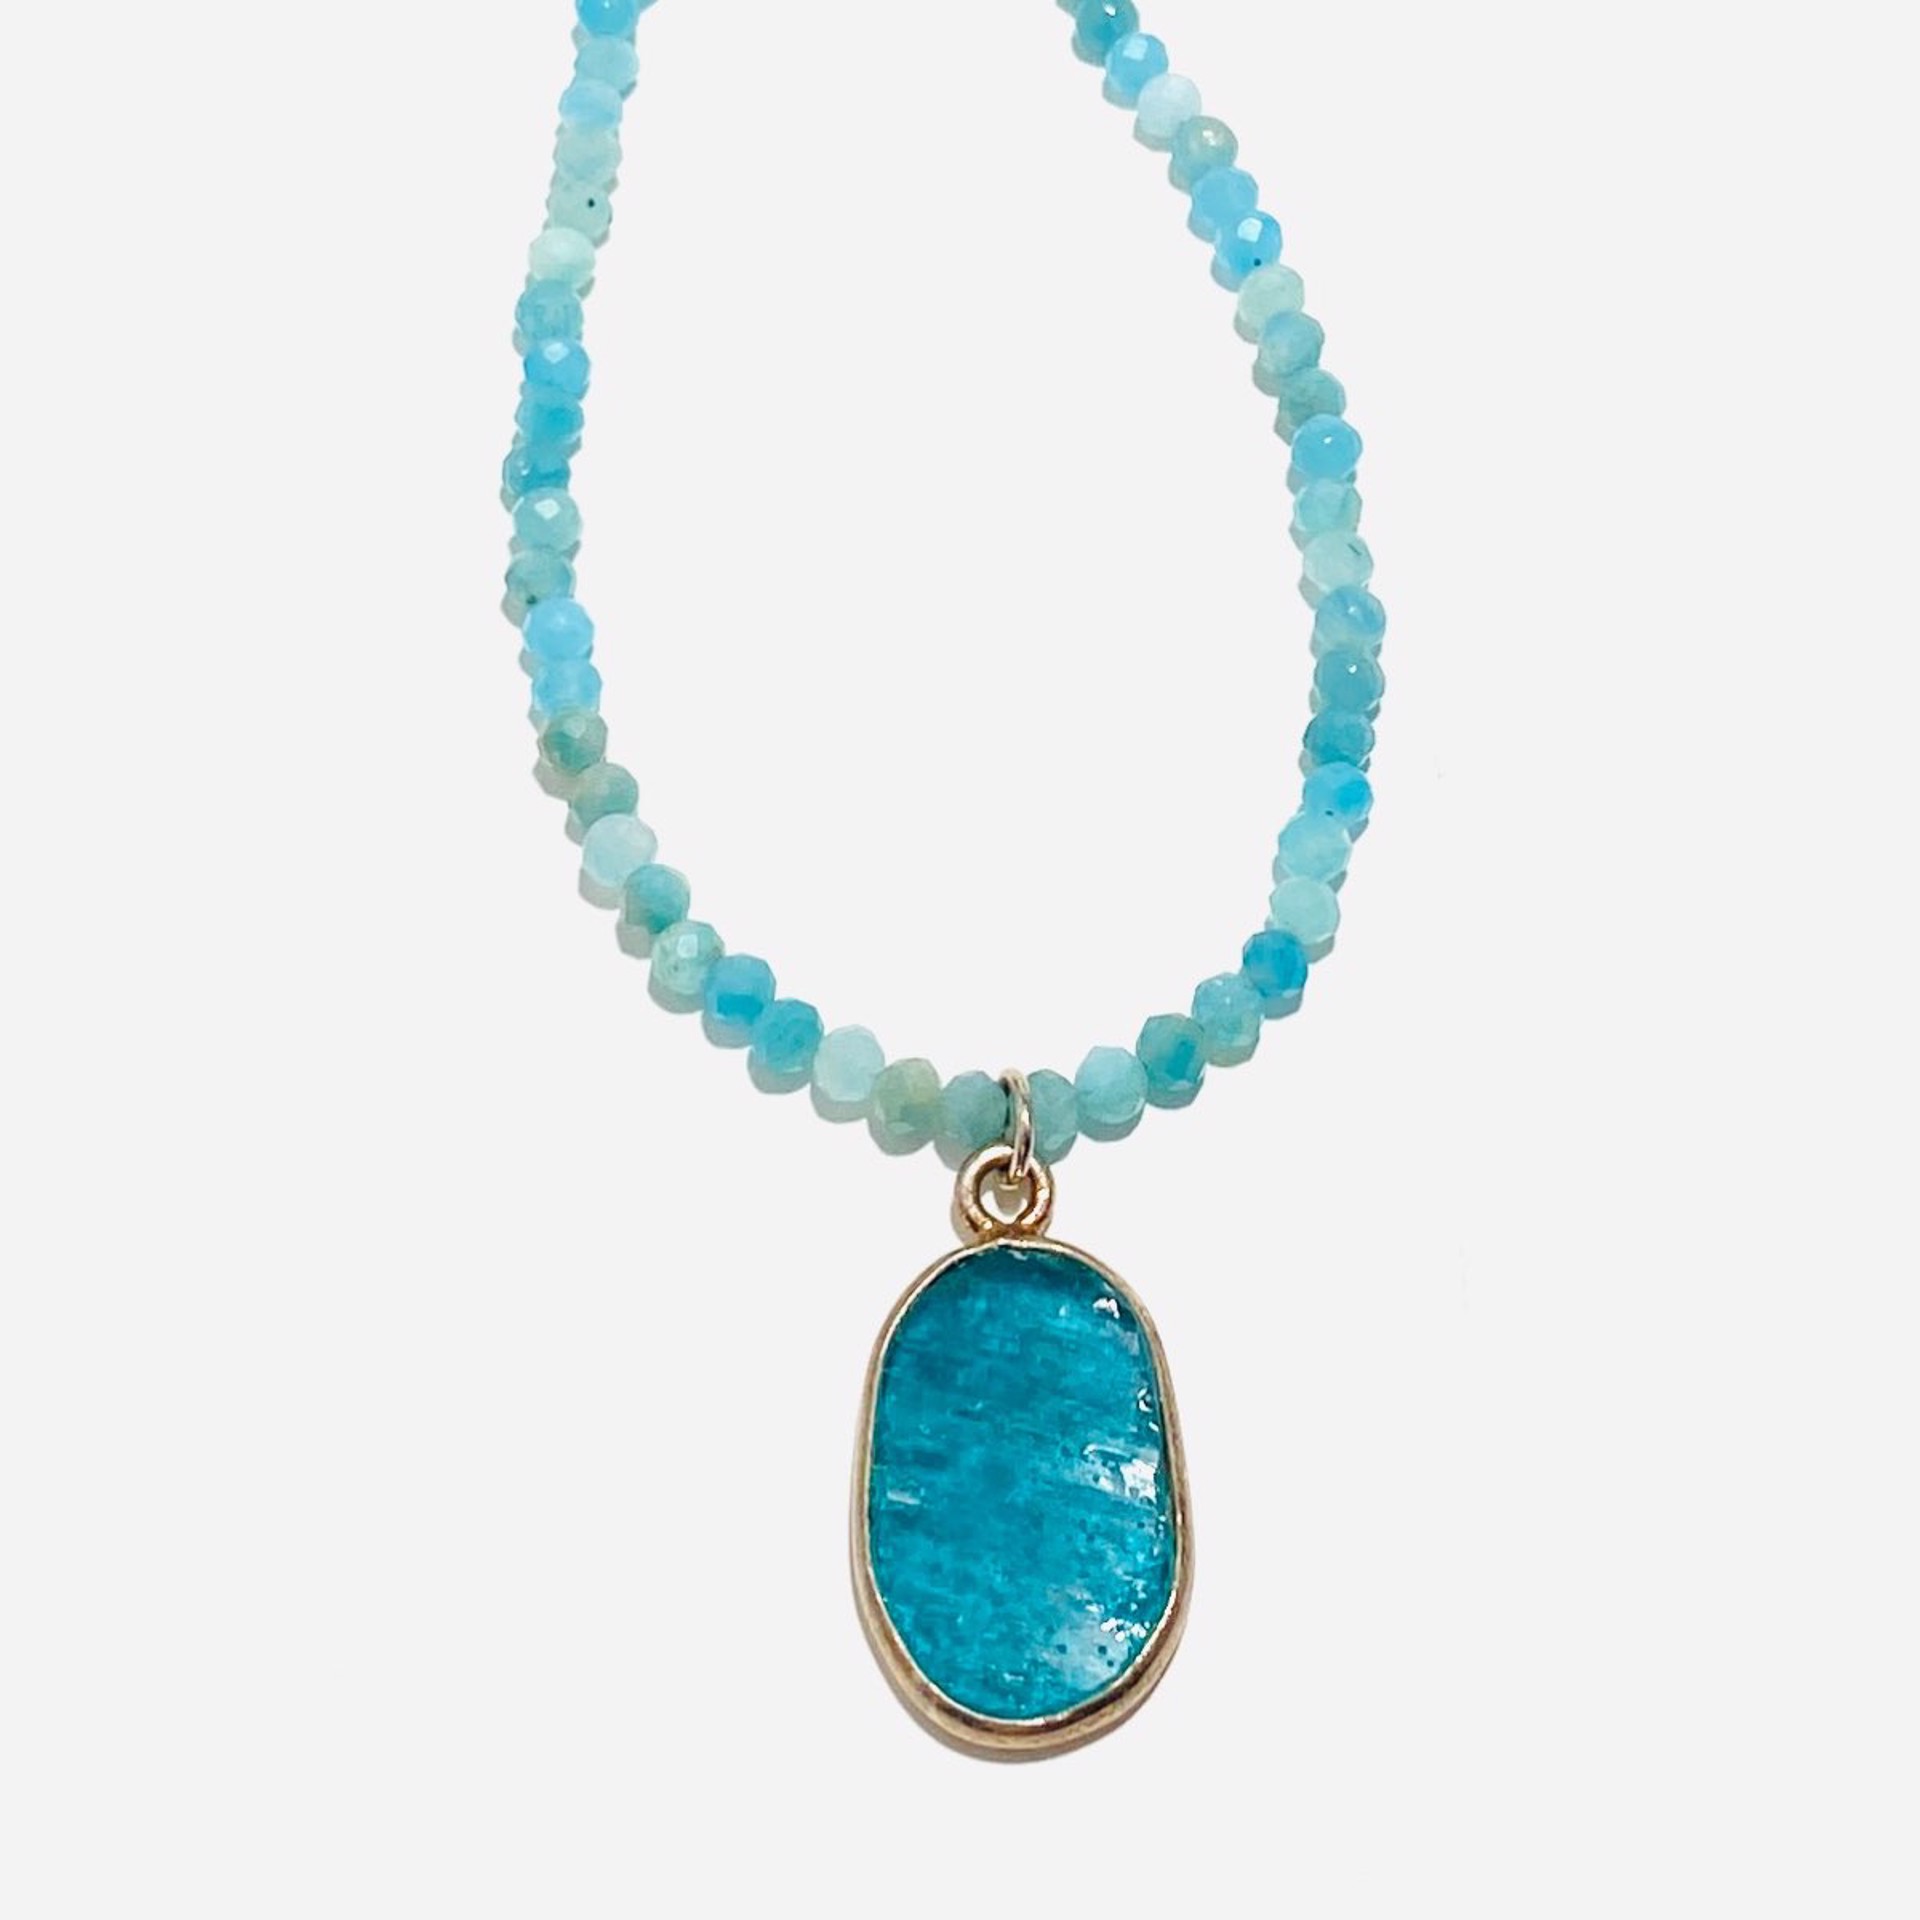 Faceted  Amazonite  Roman Glass Pendant Necklace by Nance Trueworthy